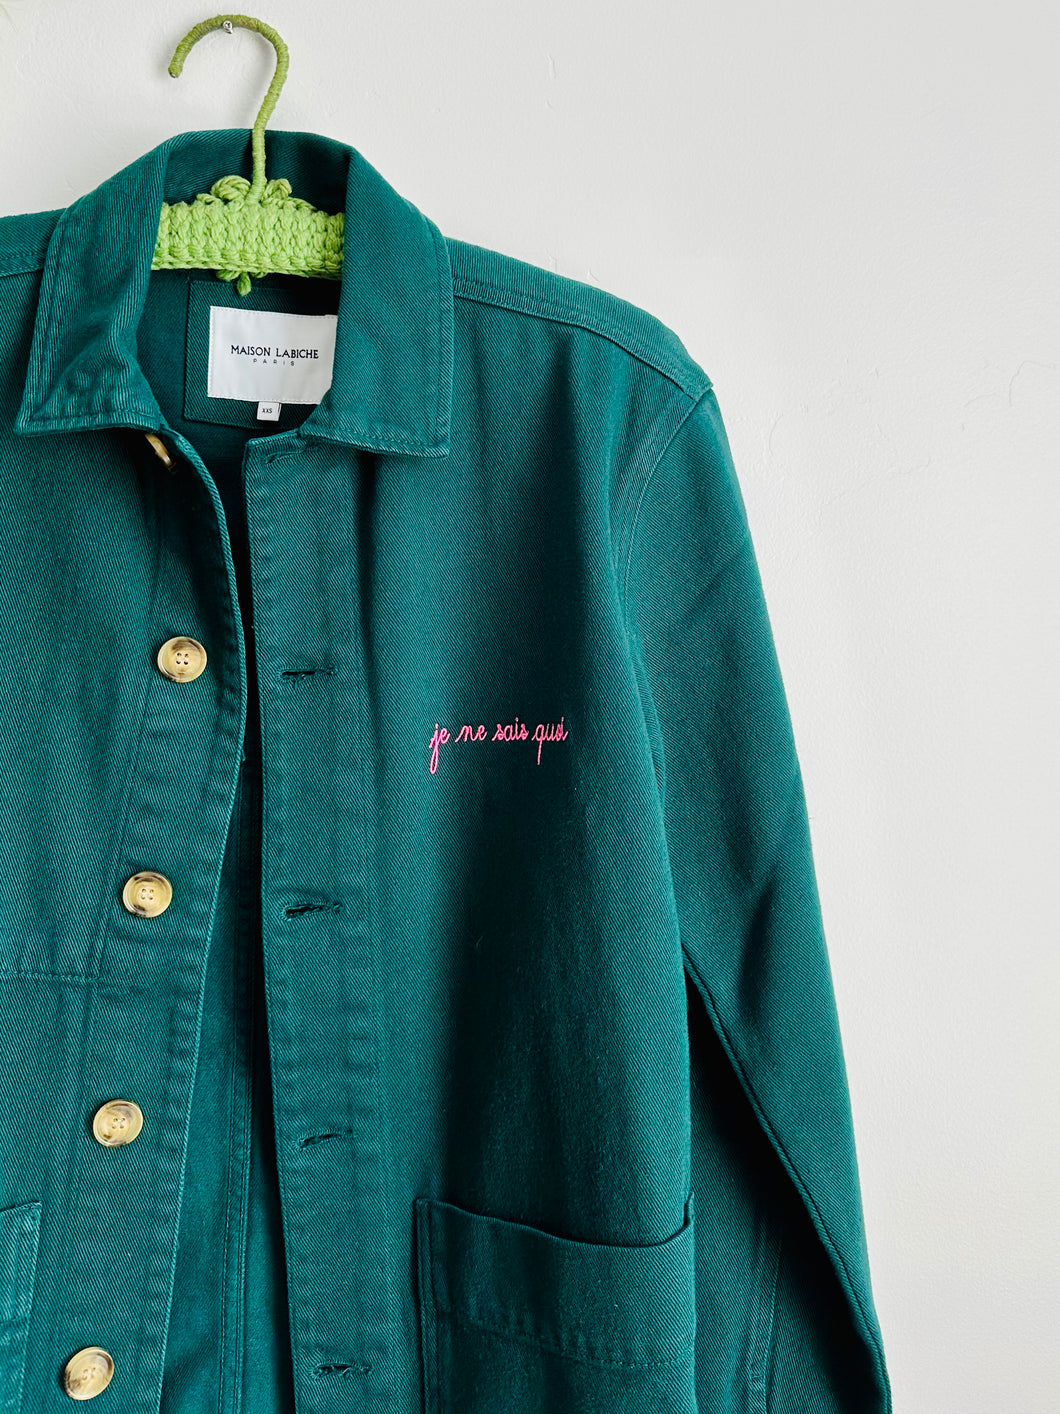 French forest green embroidered denim jacket